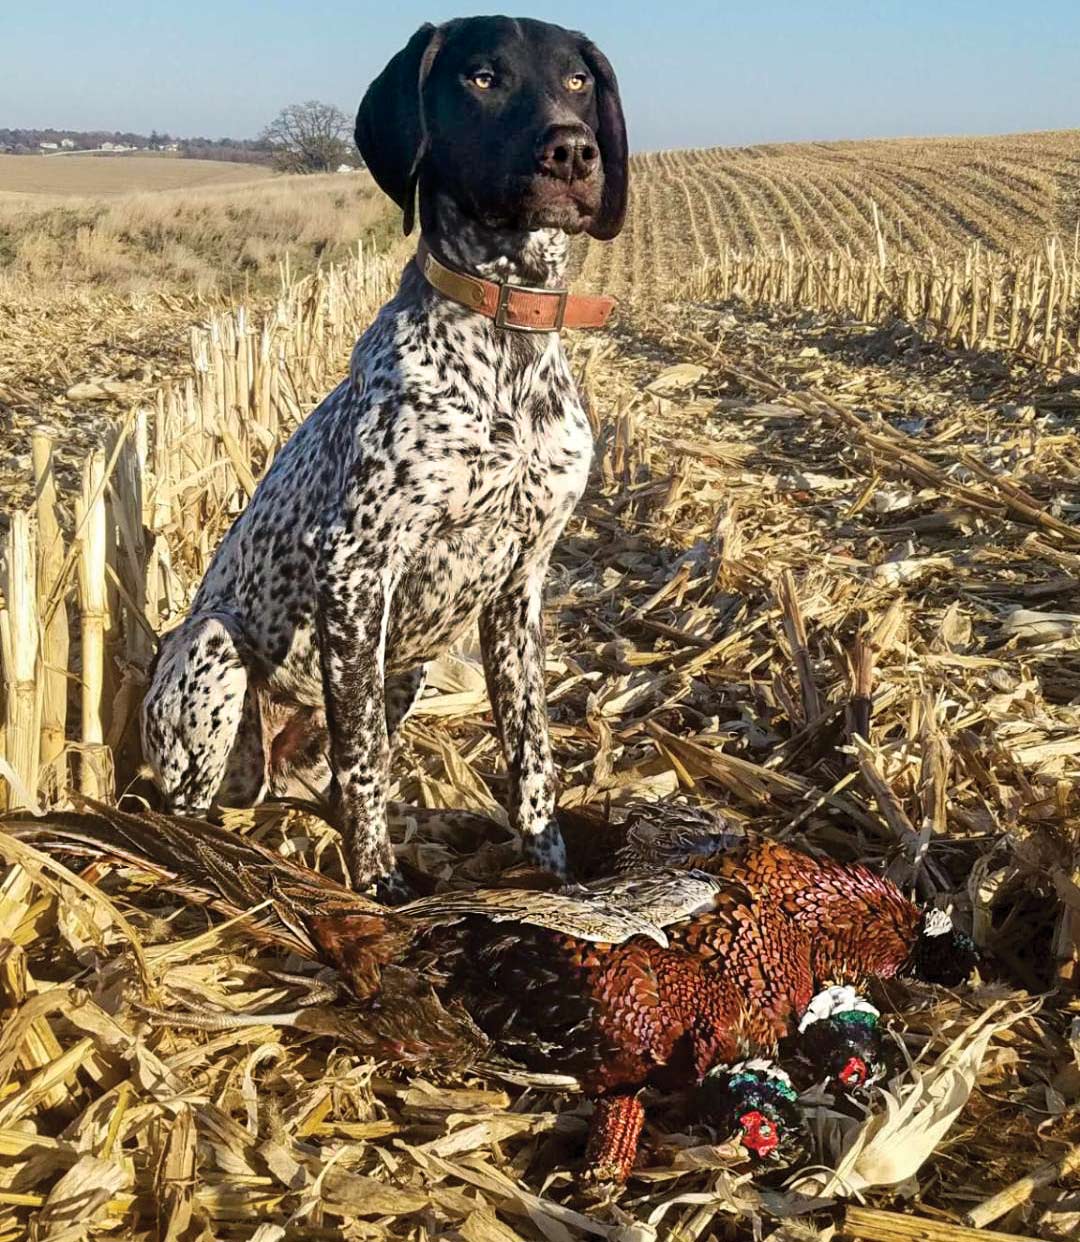 Hunting Dog Breeds: 21 Best Dogs For Hunting | Field & Stream